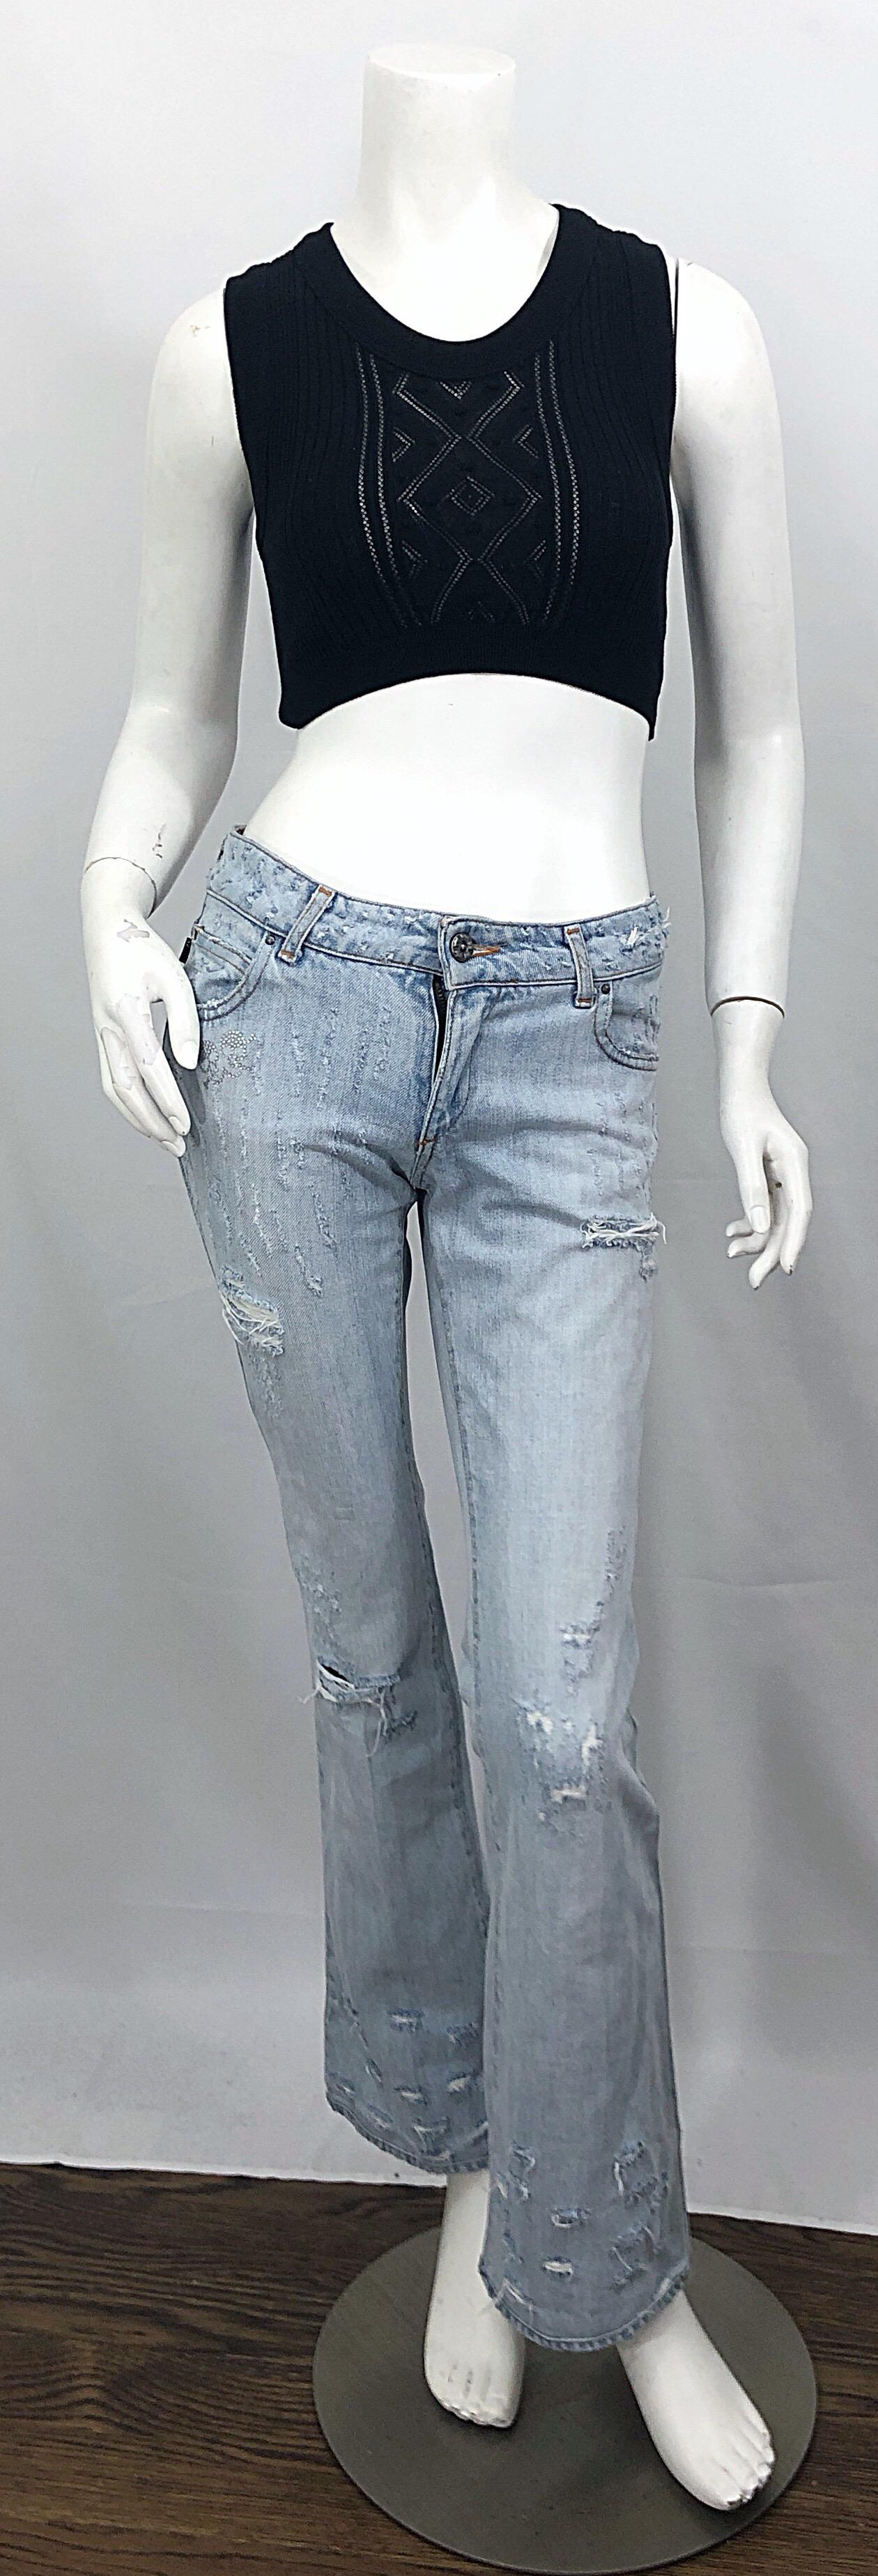 Awesome early 2000s ROBERTO CAVALLI light stonewashed distressed rhinestone skulls low rise boot cut jeans! Features distressed denim, wih two rhinestone encrusted skulls under the front right pocket. Button closure at center waistband with zipper